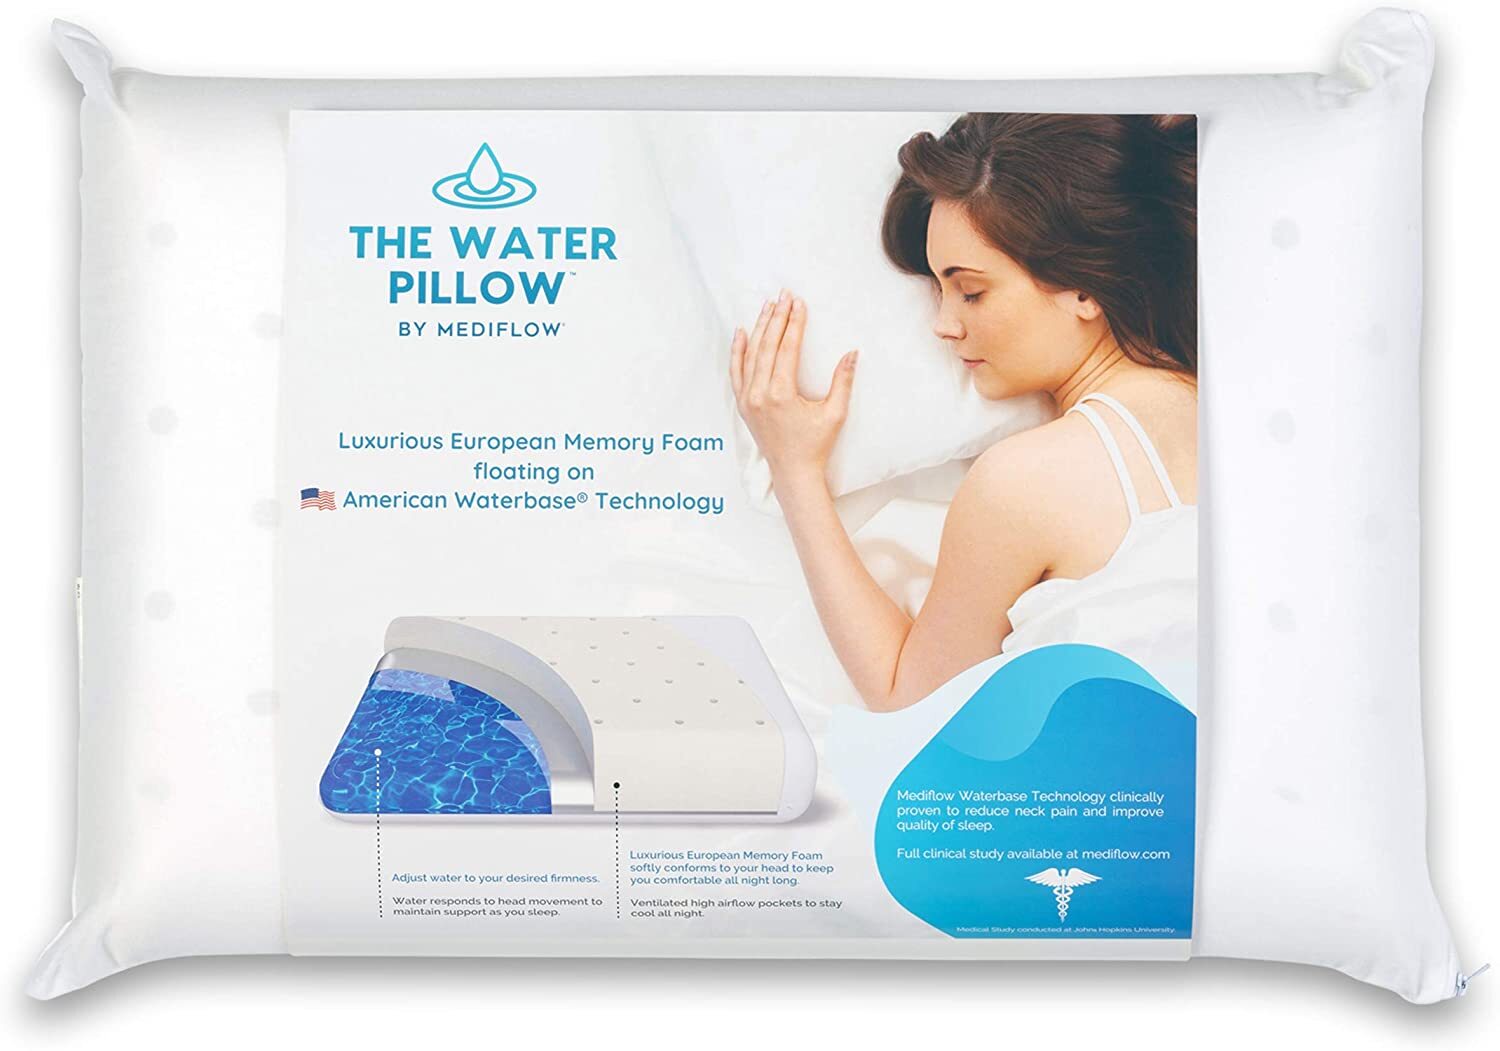 Physical Therapists Weigh In On The Water Pillows Trending On